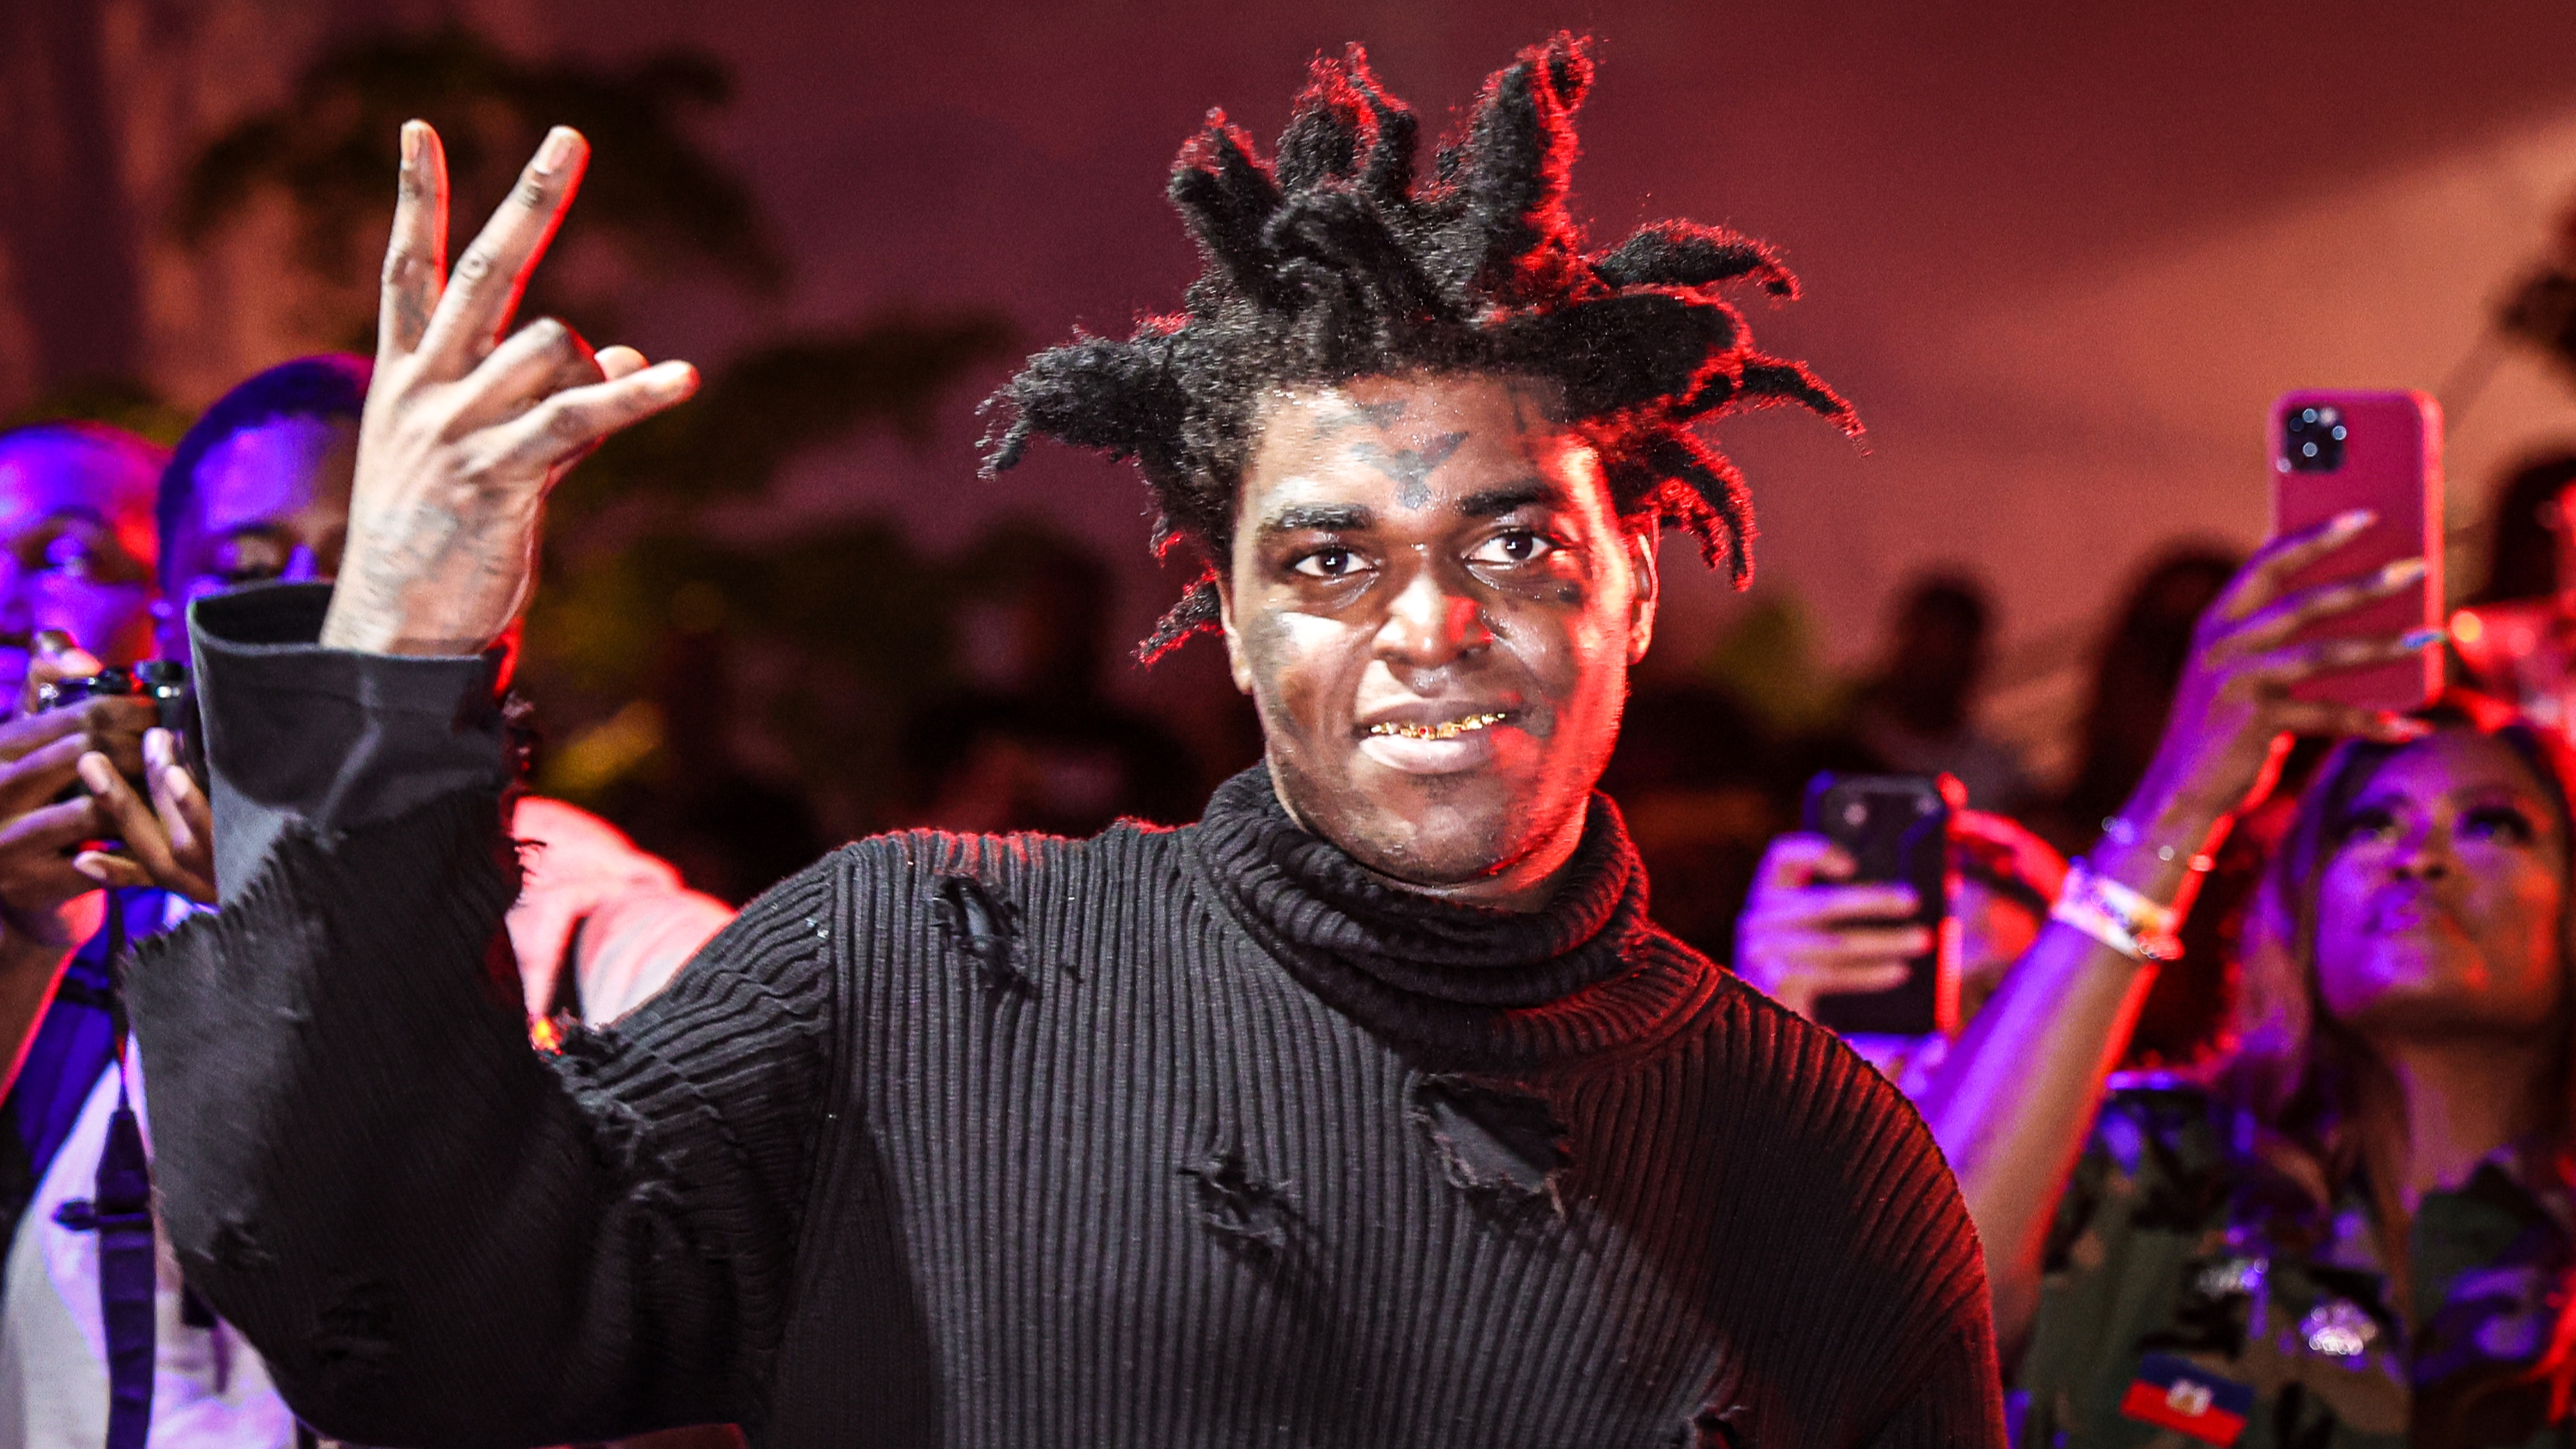 Kodak Black Made A Problematic Comment About His Pregnant Girlfriend